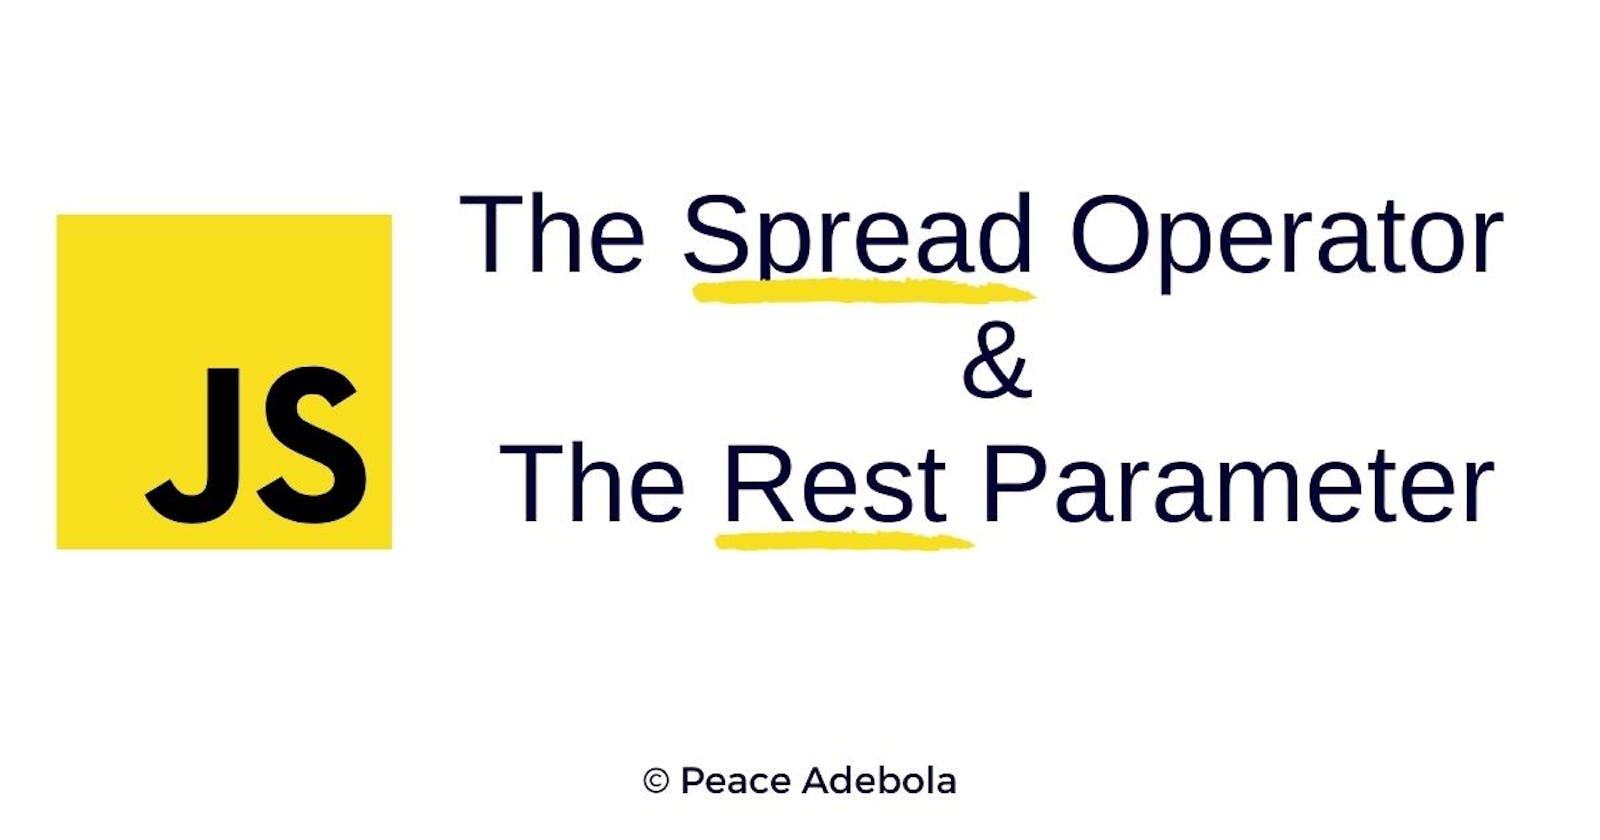 The Spread Operator & The Rest Parameter